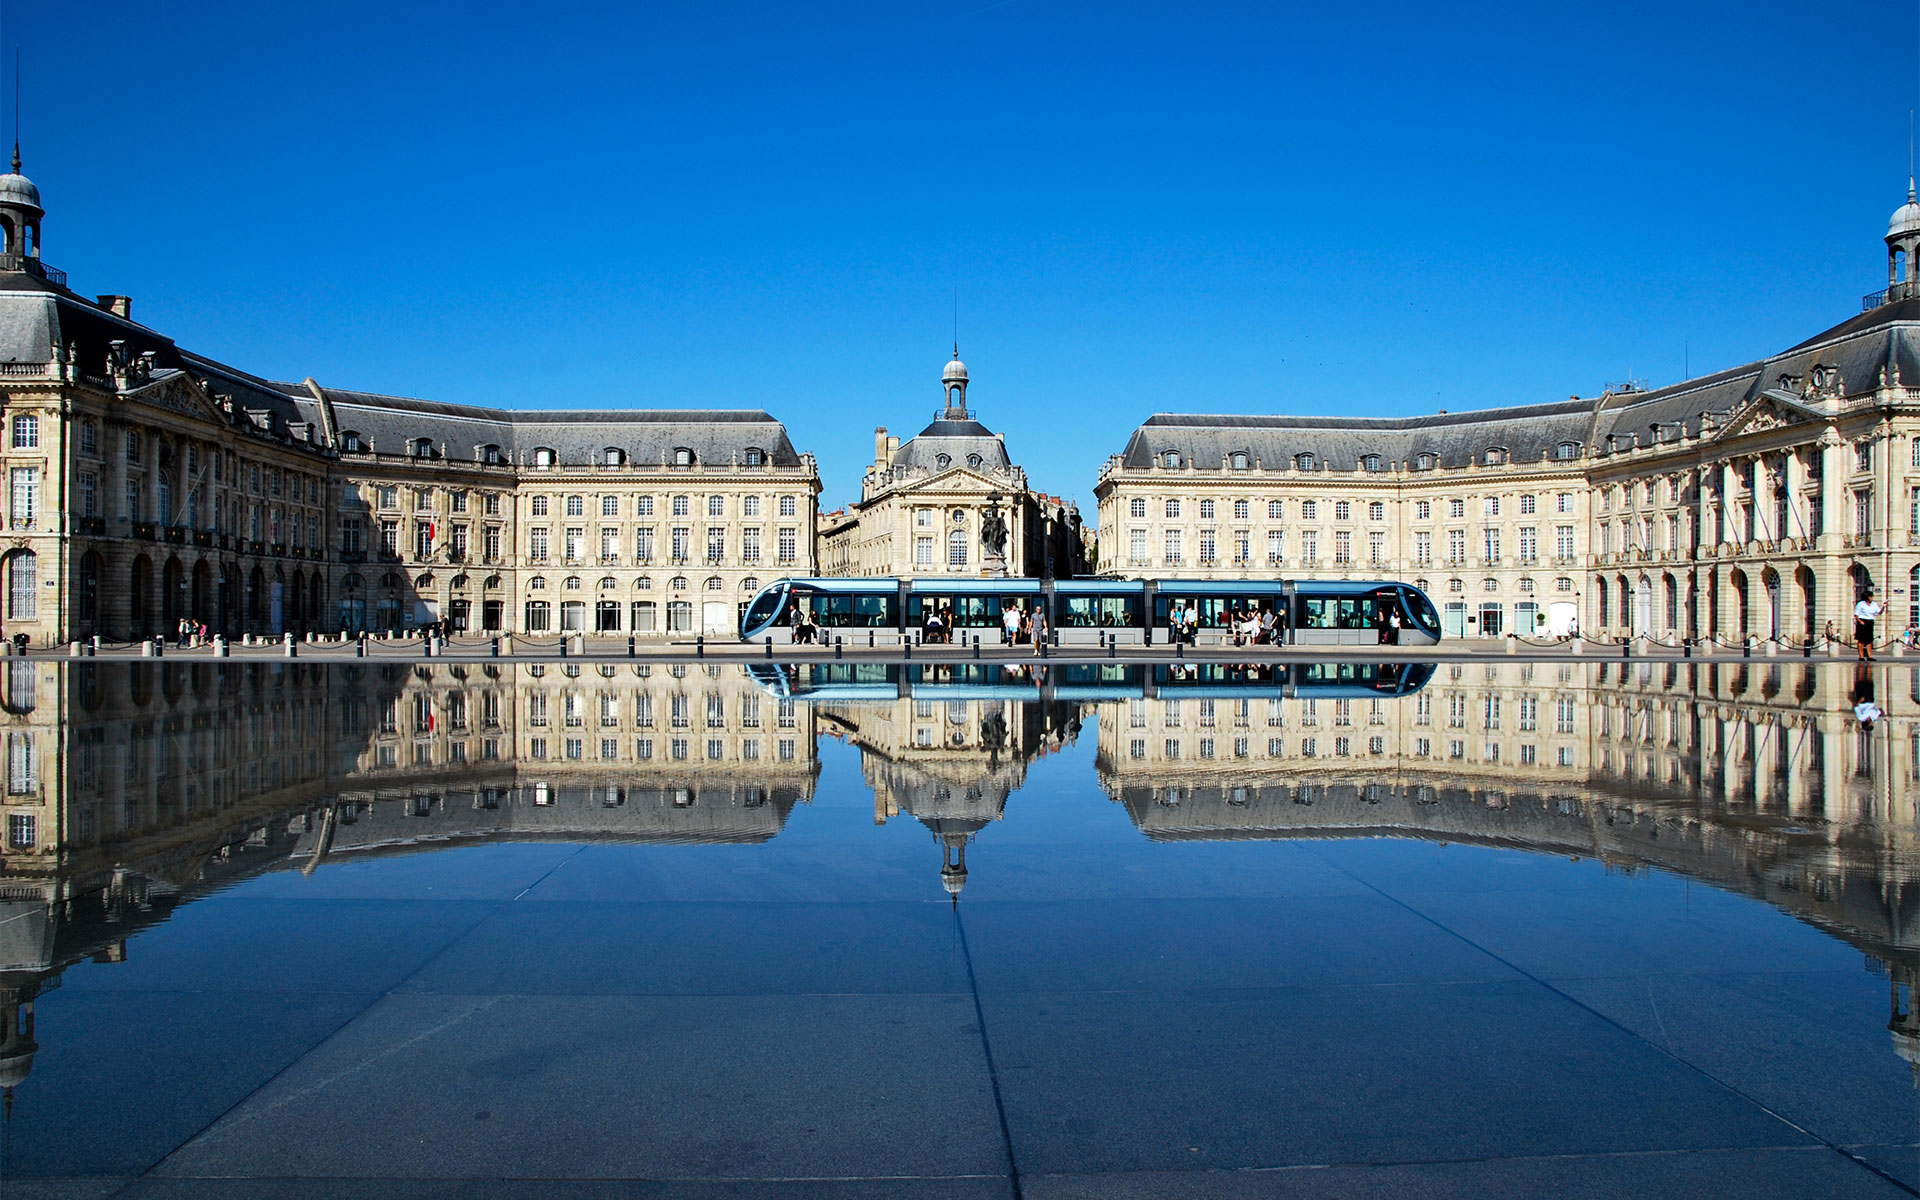 Bordeaux is moving closer to Paris with the opening of a new high-speed line in western France (photo © Vanessak / dreamstime.com)